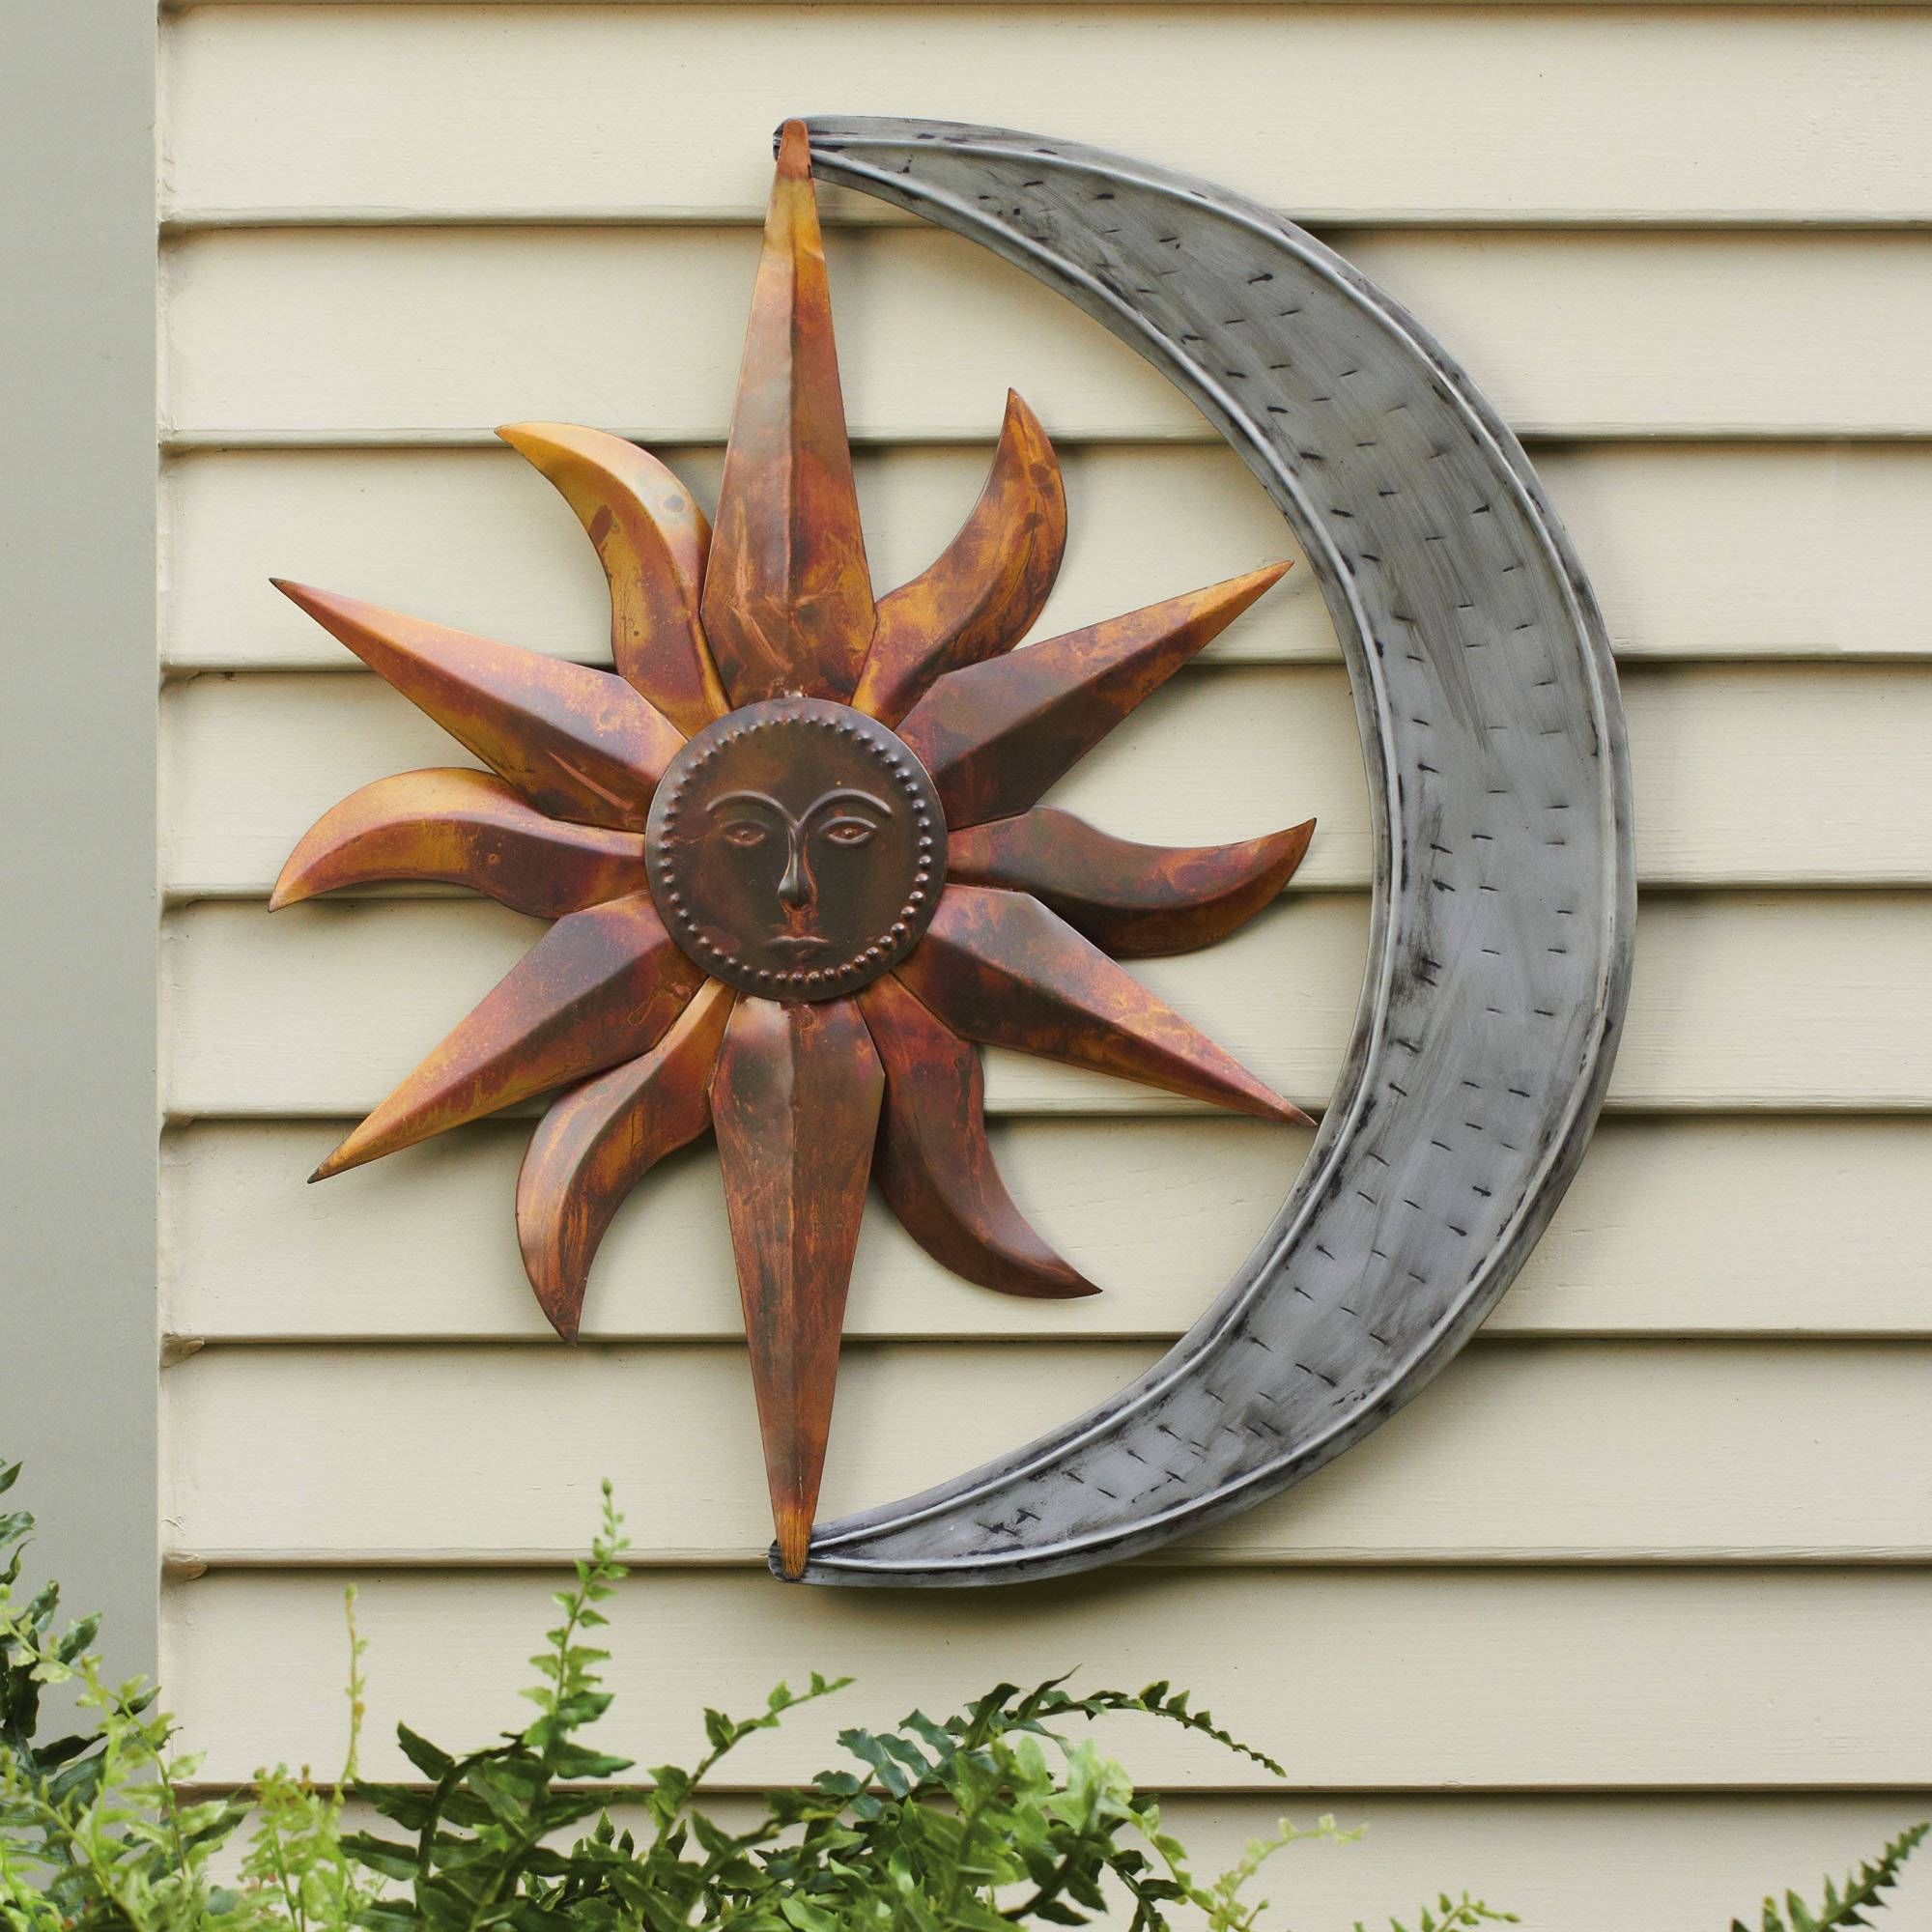 Wall Art Designs: Outdoor Wall Art Decor Wall Plaques And Metal Intended For Best And Newest Inexpensive Metal Wall Art (View 7 of 20)